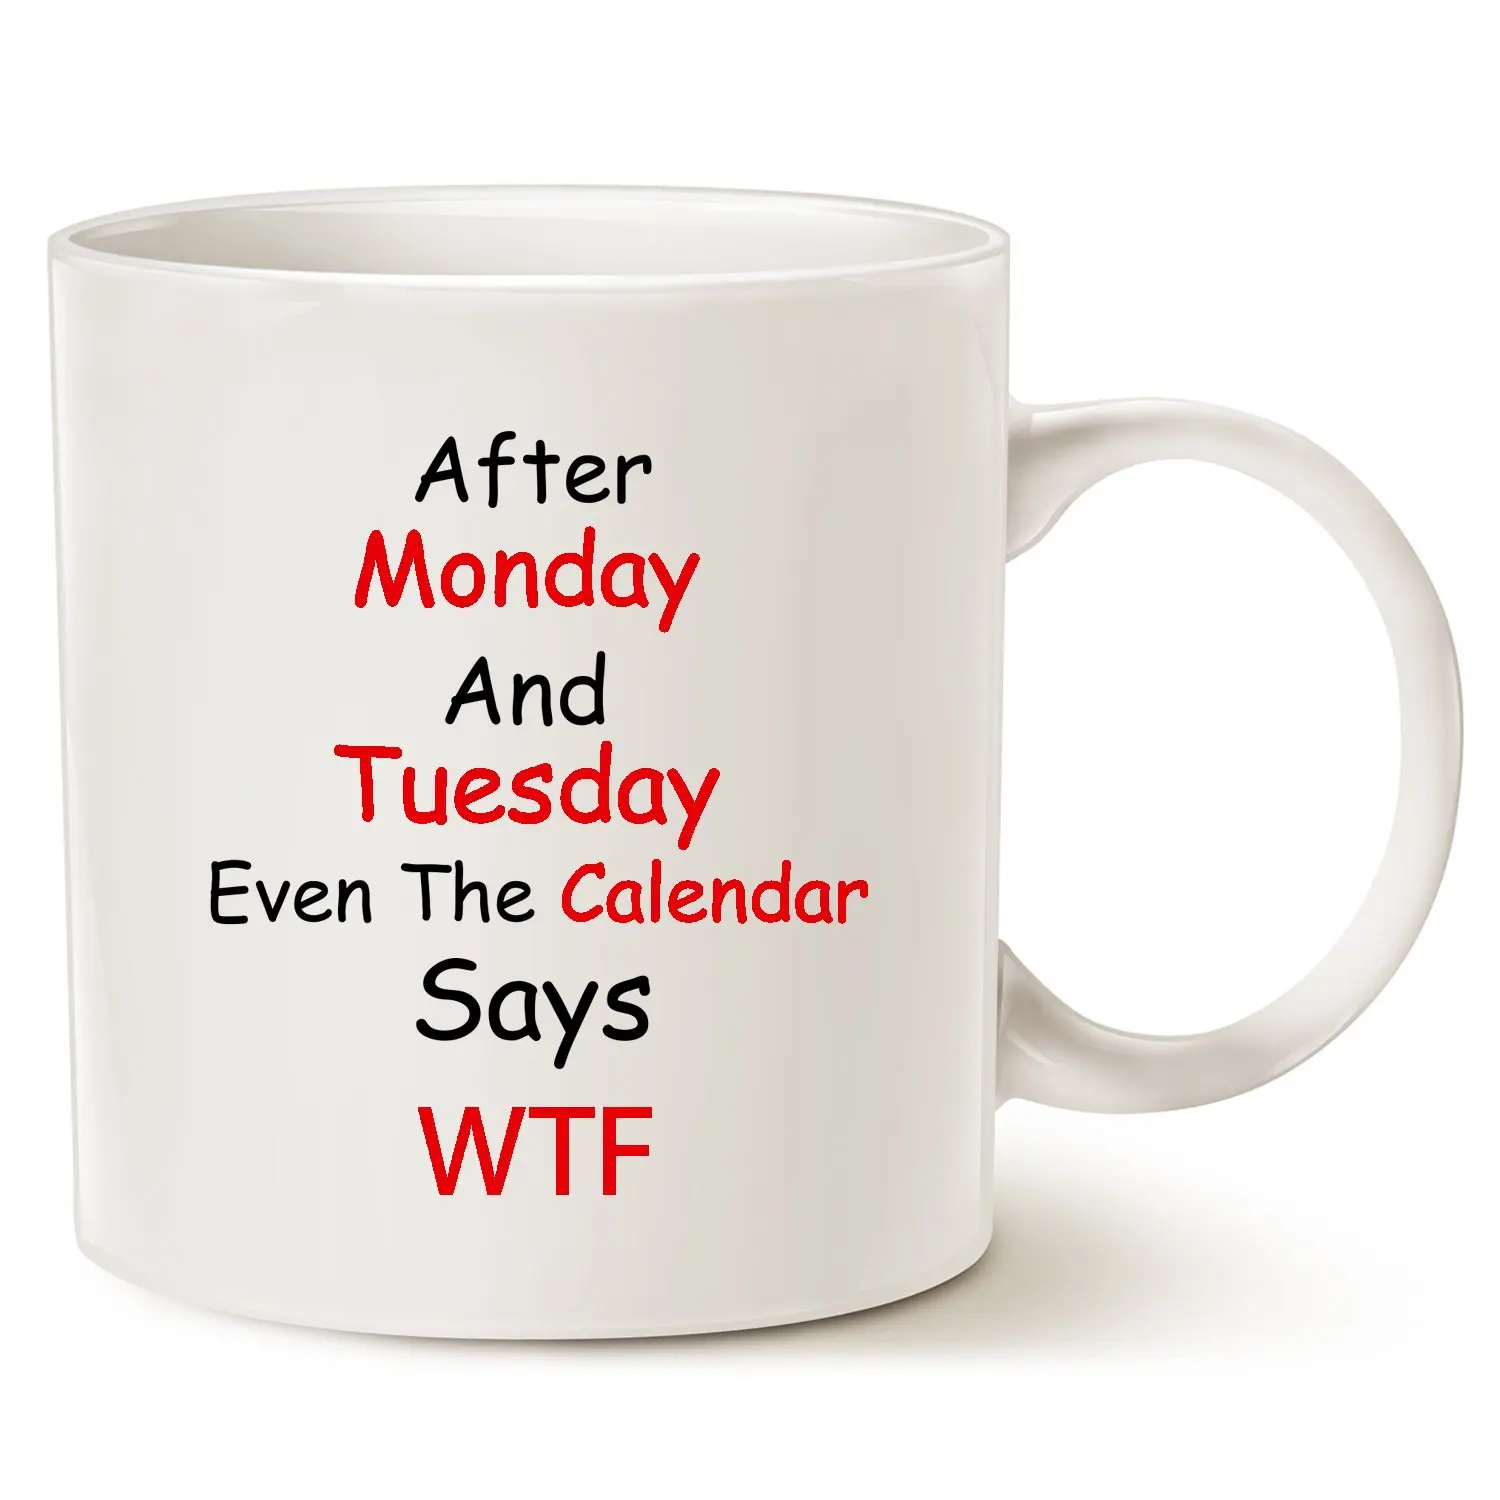 don't mess with me coffee cup fathers day mothers day gift computer technician gift funny mug